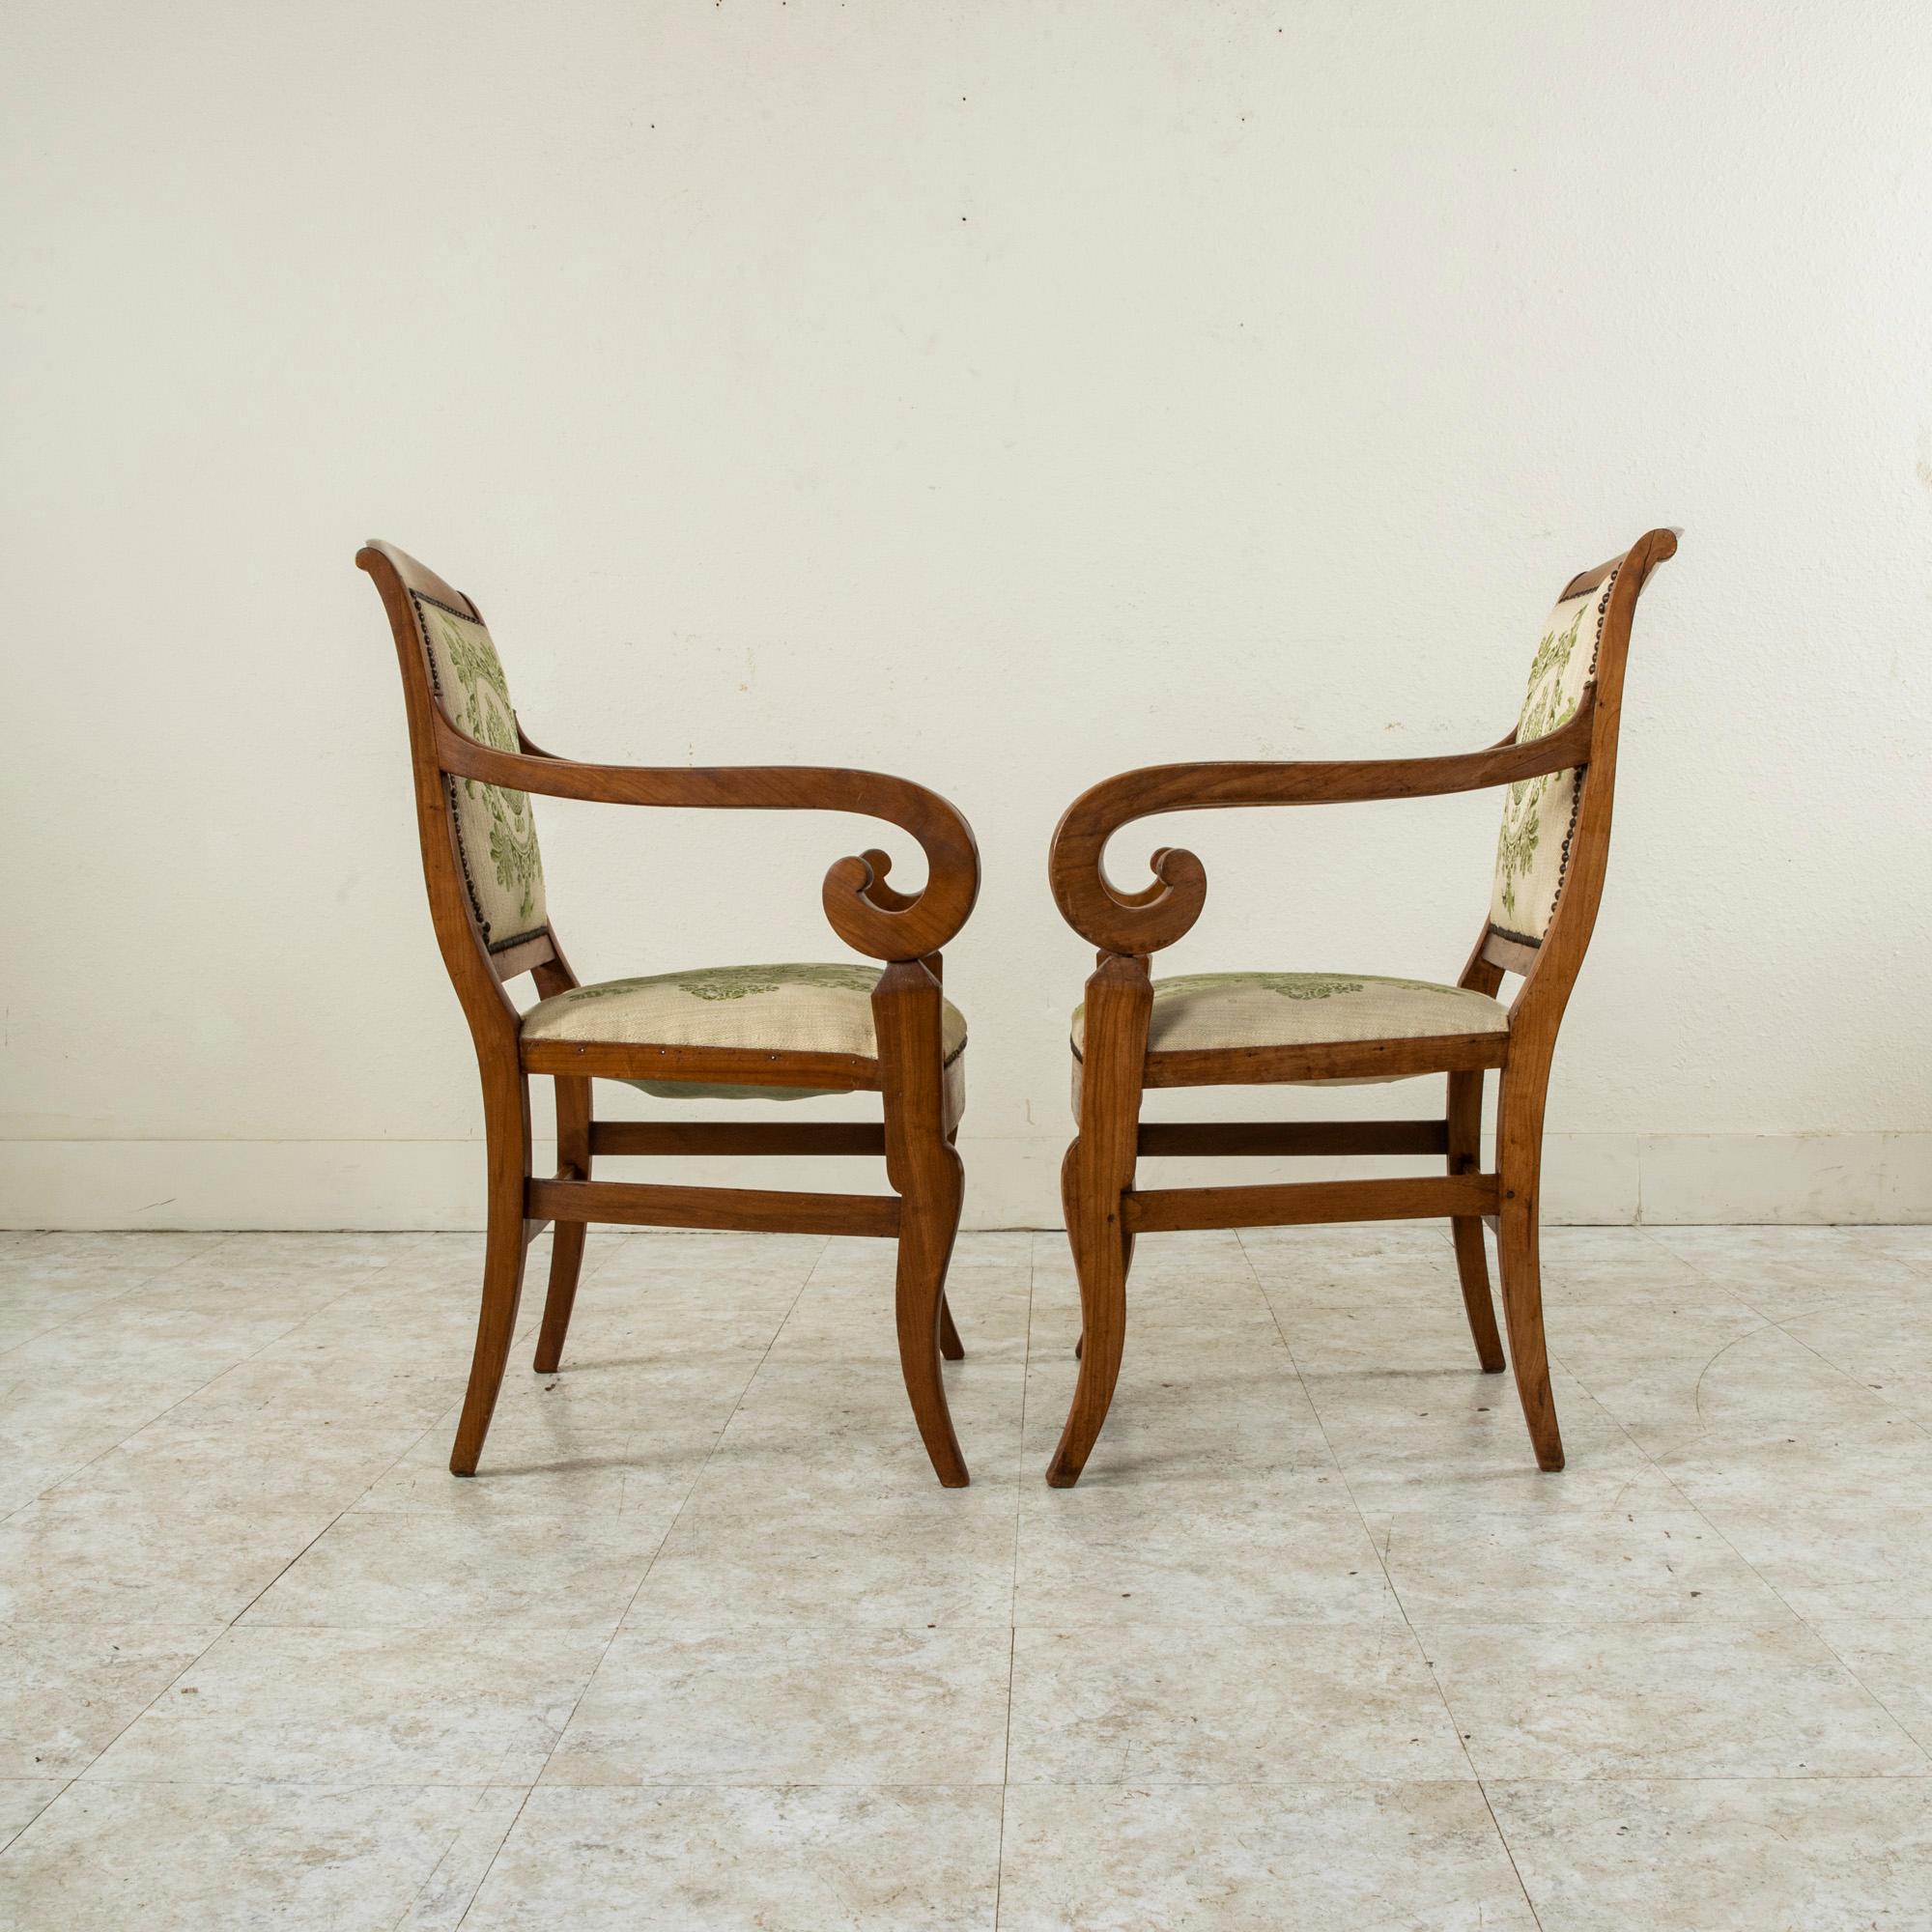 Early 19th Century French Restauration Period Elm Armchairs with Urn Motif In Good Condition For Sale In Fayetteville, AR